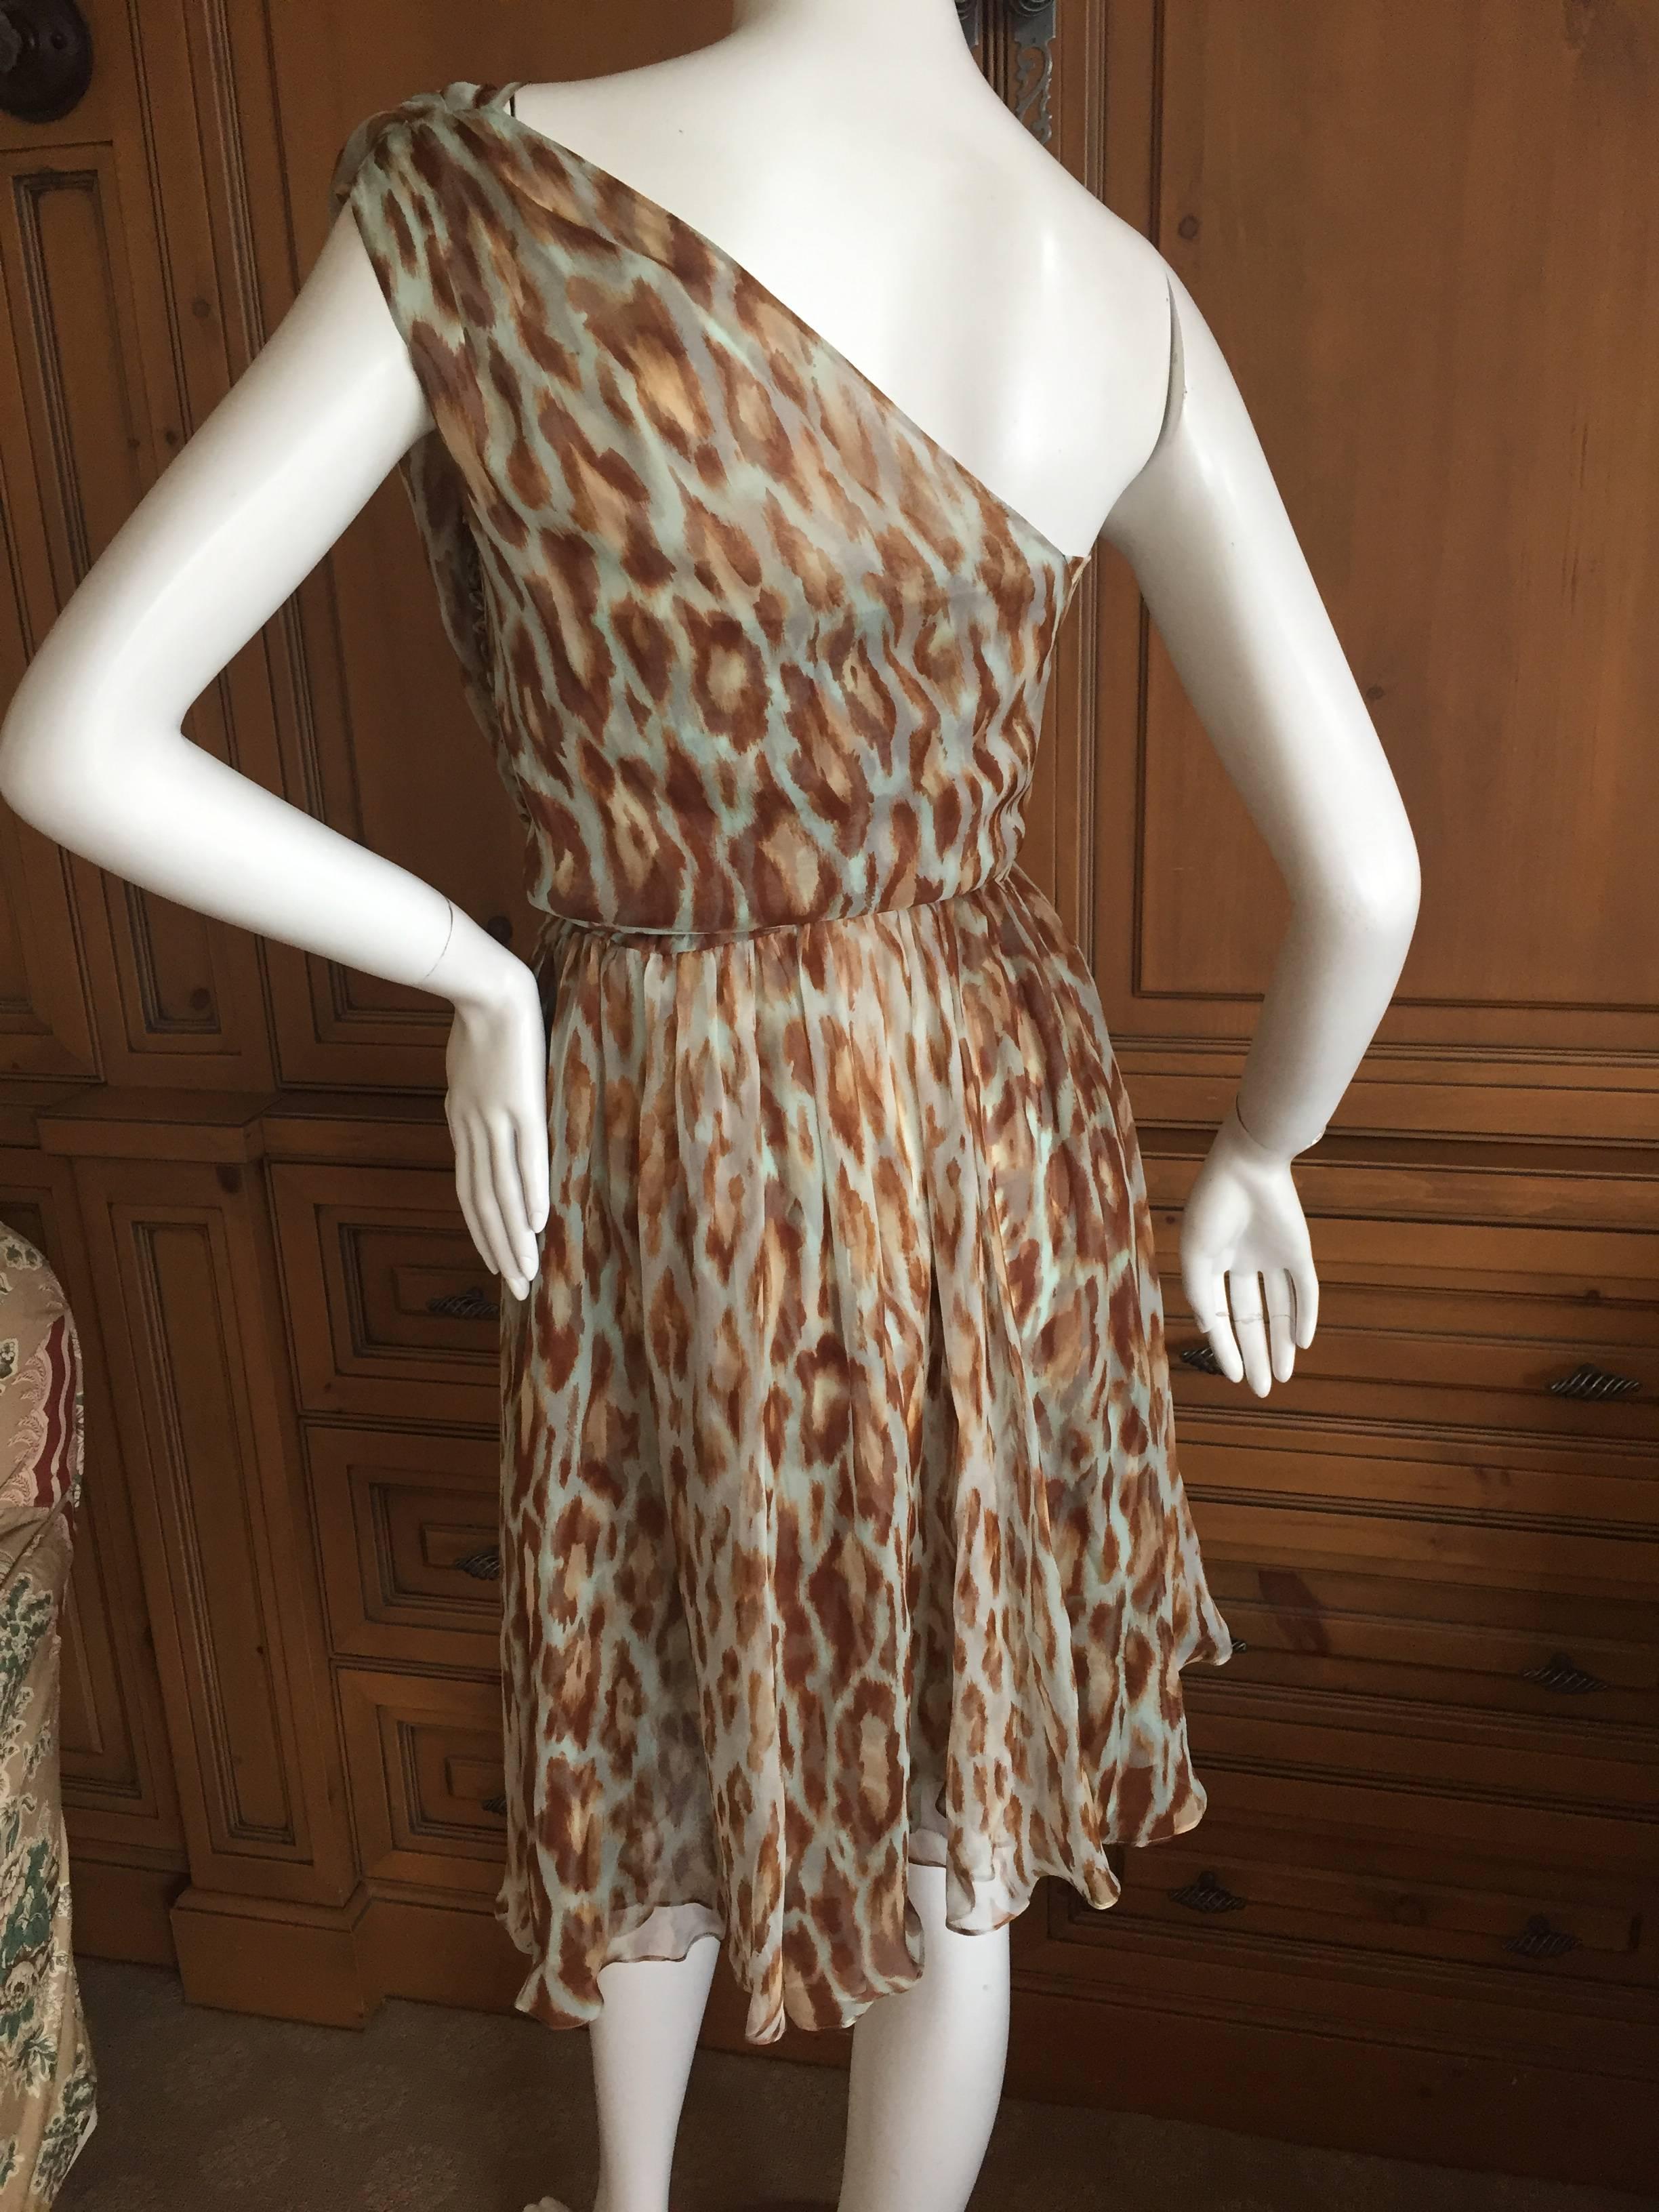 Christian Dior Galliano Chic One Shoulder Leopard Print Silk Dress w Jewel Belt  In Excellent Condition For Sale In Cloverdale, CA